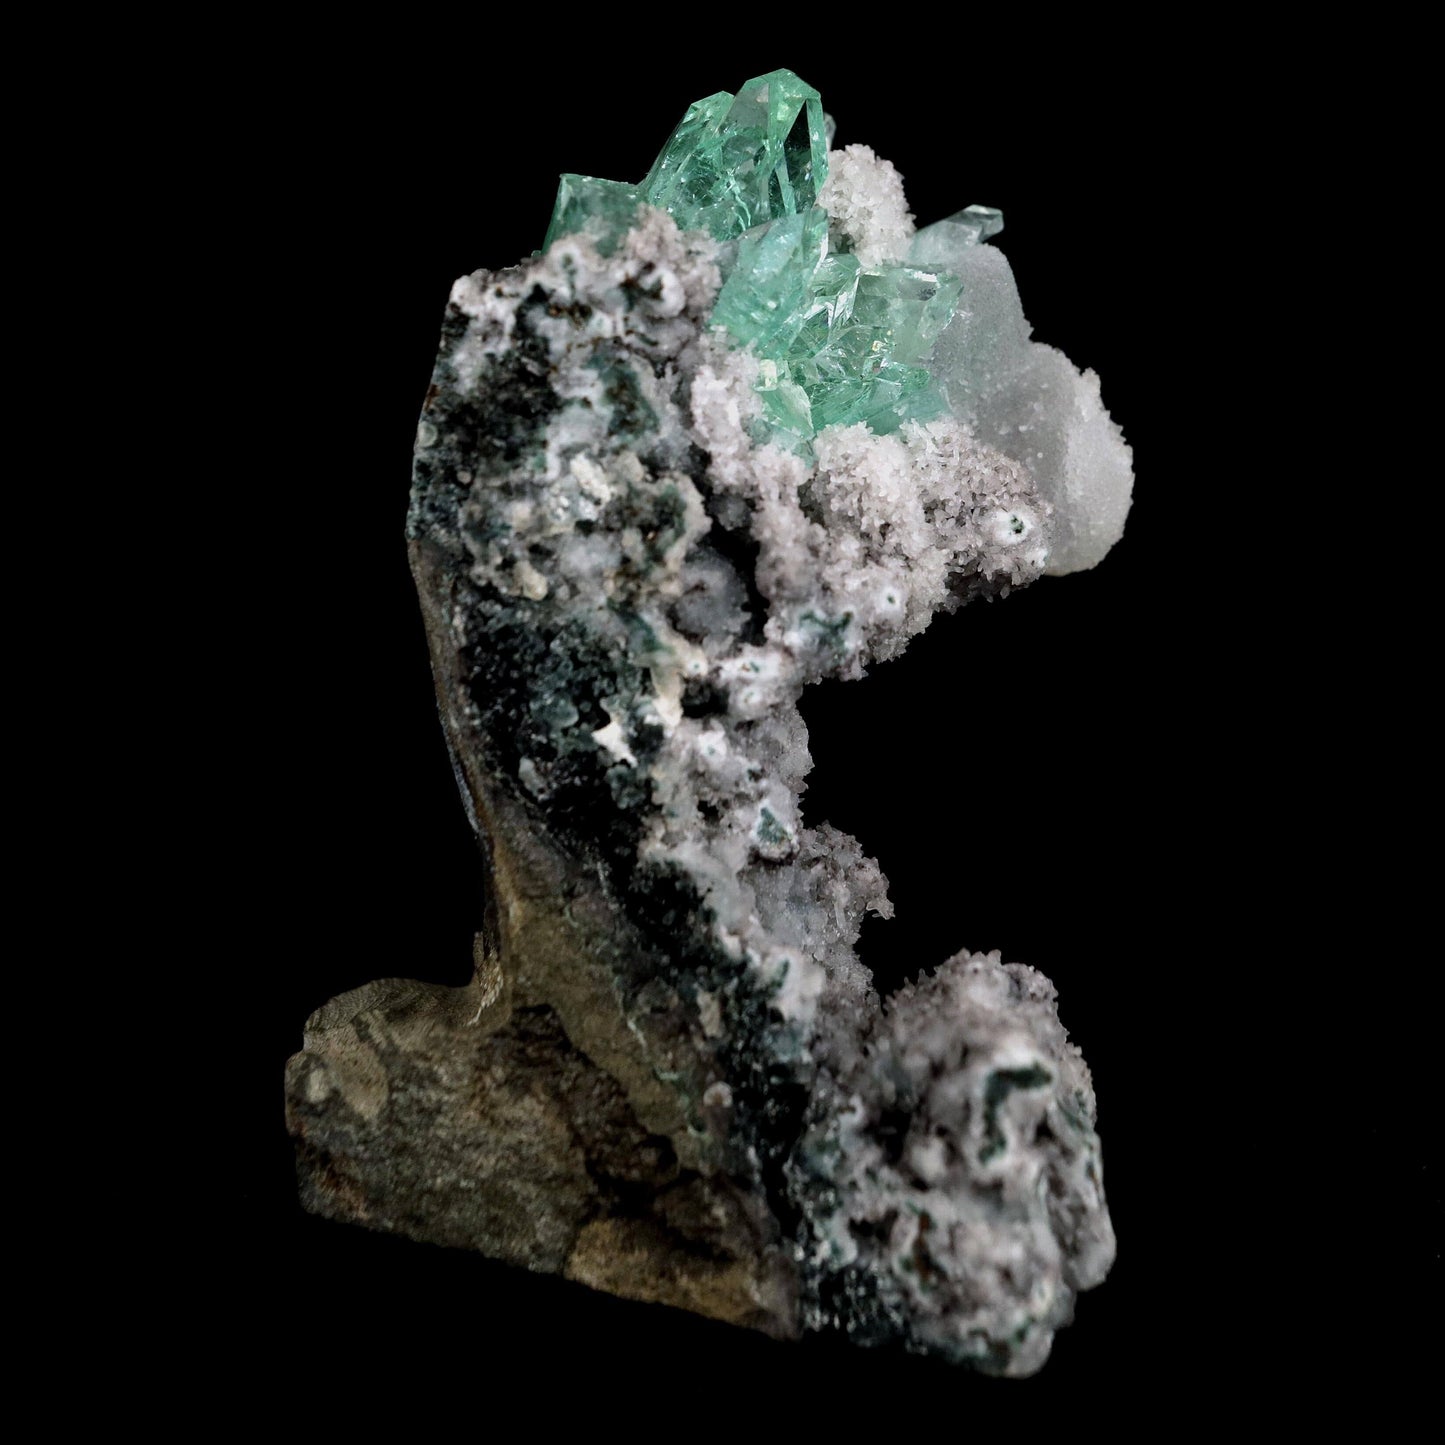 Green Apophyllite with Coated Calcite on Black Chalcedony Natural Mine…  https://www.superbminerals.us/products/green-apophyllite-with-coated-calcite-on-black-chalcedony-natural-mineral-specimen-b-4600  Features:An exceptionally sculptural and impressive large combination zeolite specimen from Aurangabad. The very well prepared deep triangular vug in basalt matrix is lined with sparkly, bubbly, drusy gray chalcedony. The striking and aesthetic mound in the middle hosts pearlescent